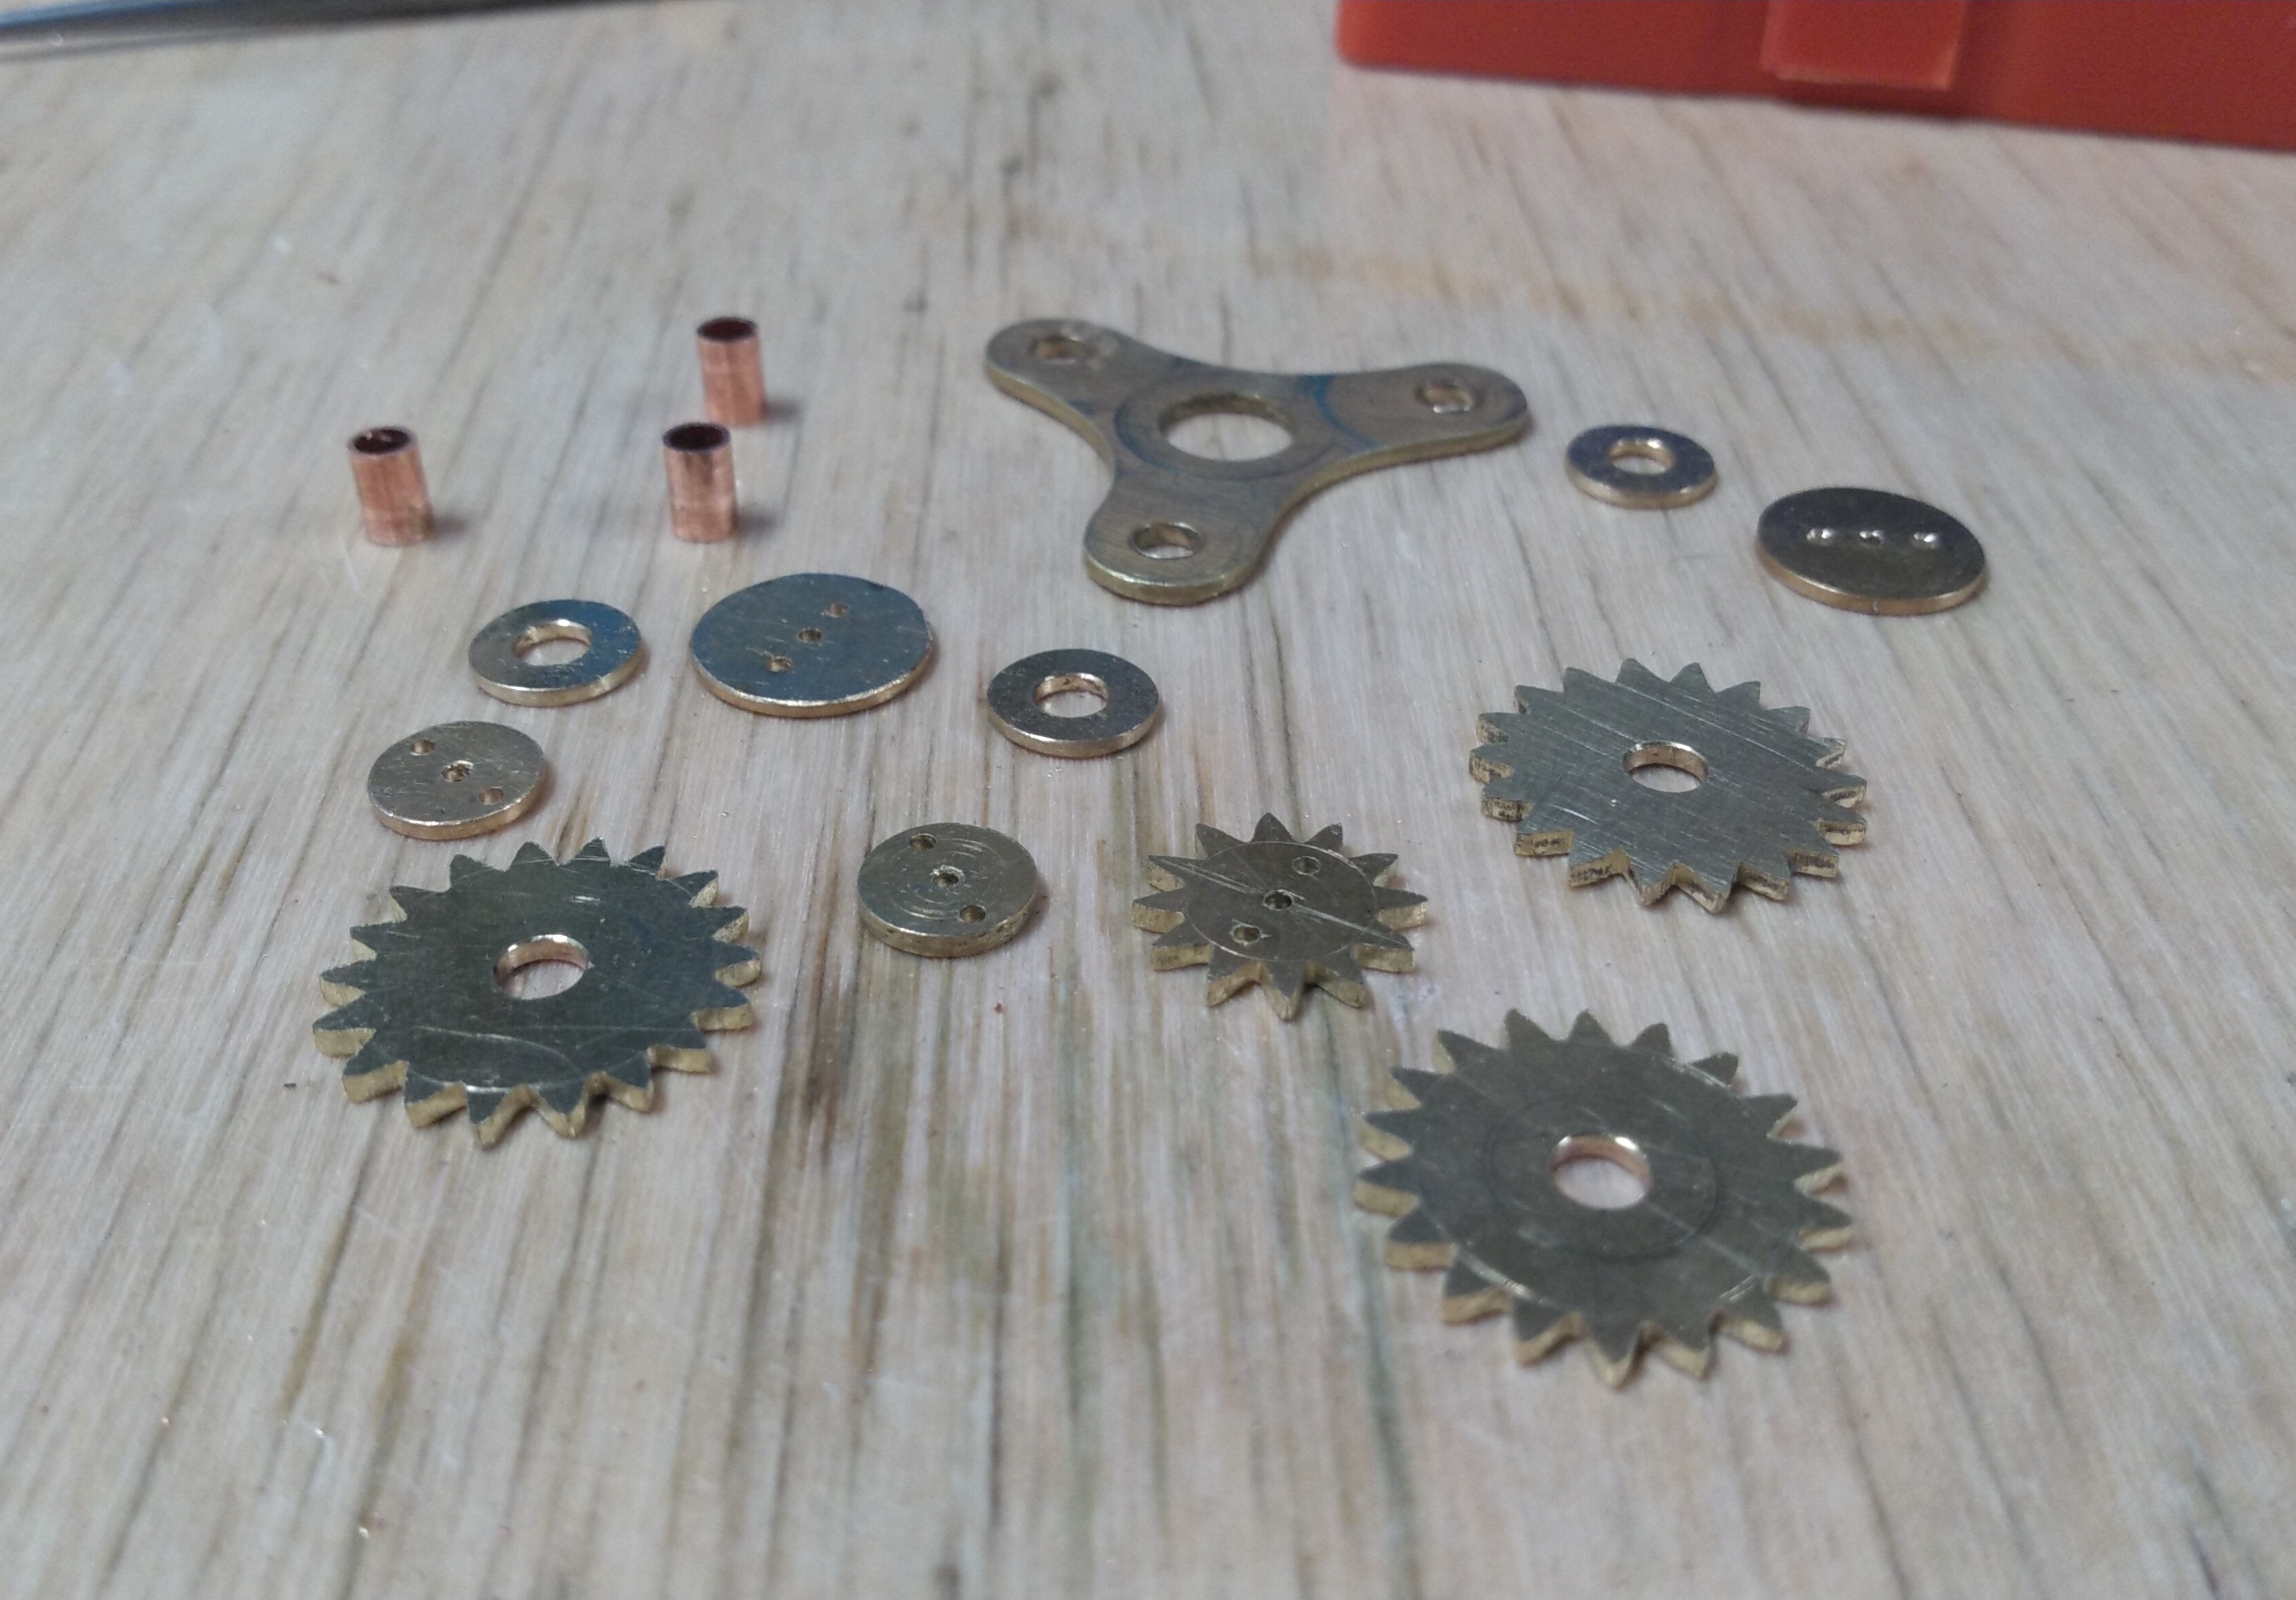 brass and copper components, including gears, washers, and bearings